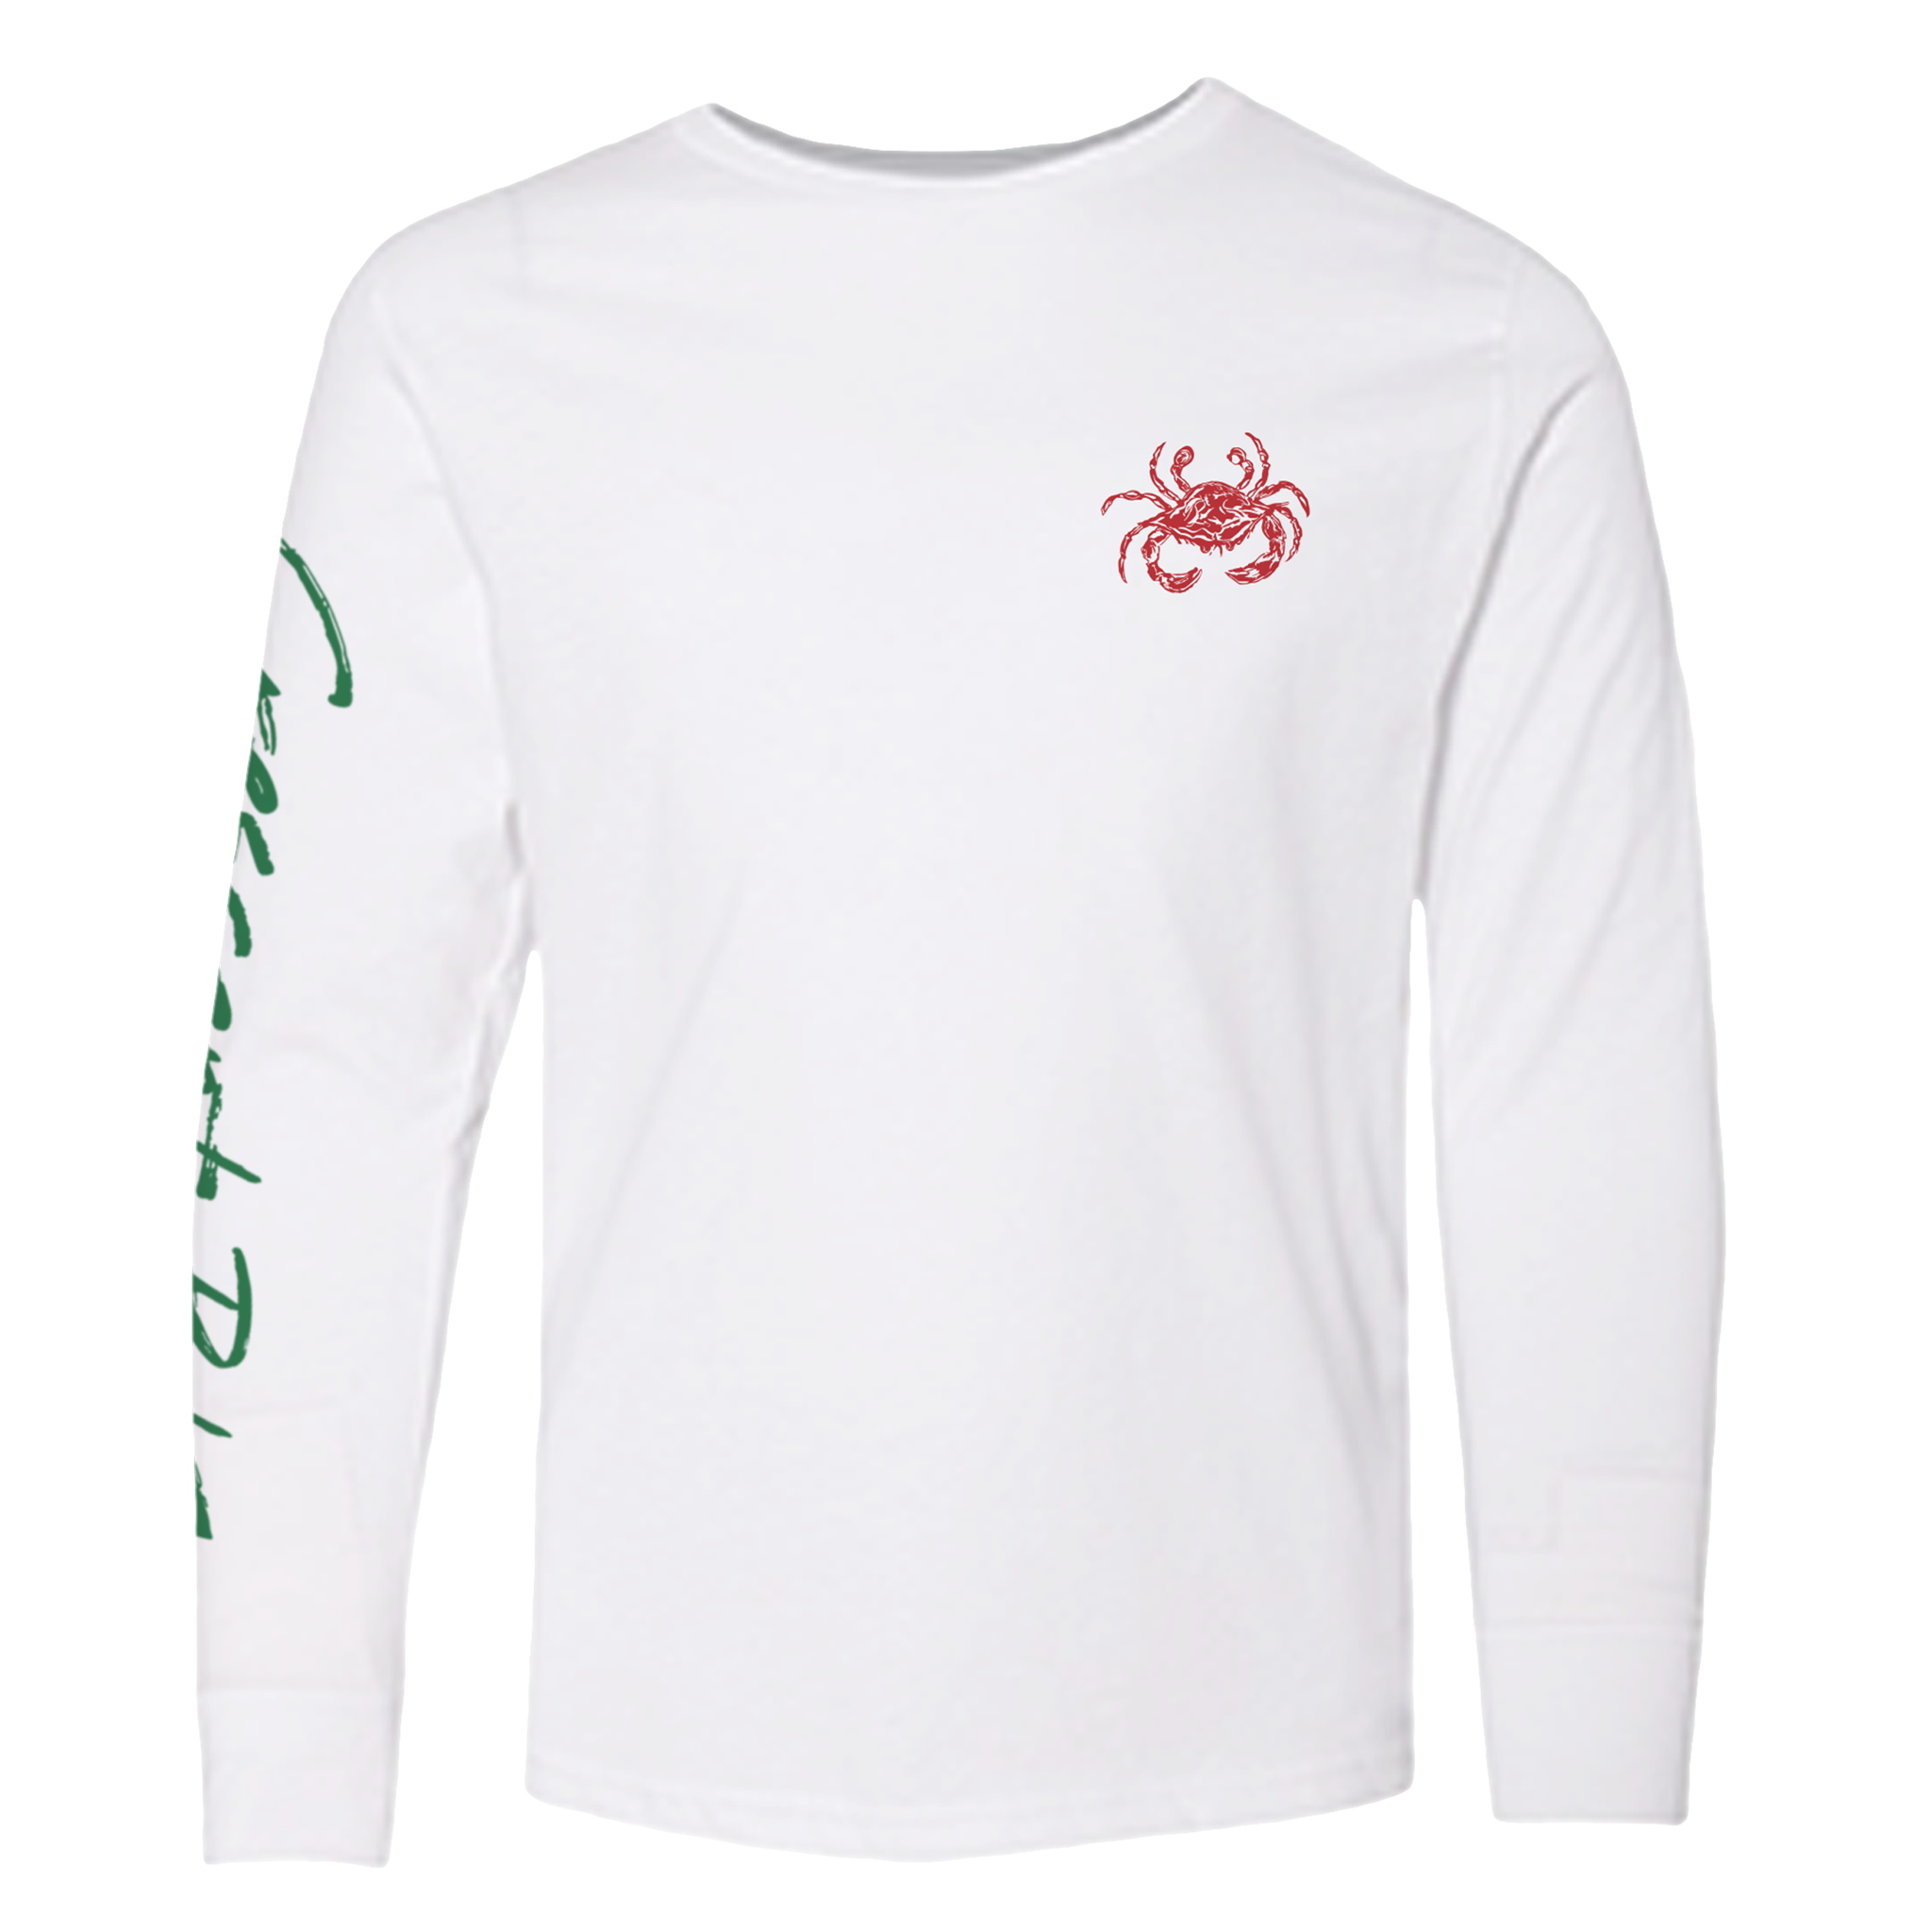 Youth white long sleeve tee with a red crab on the left chest and green writing on the right sleeve.